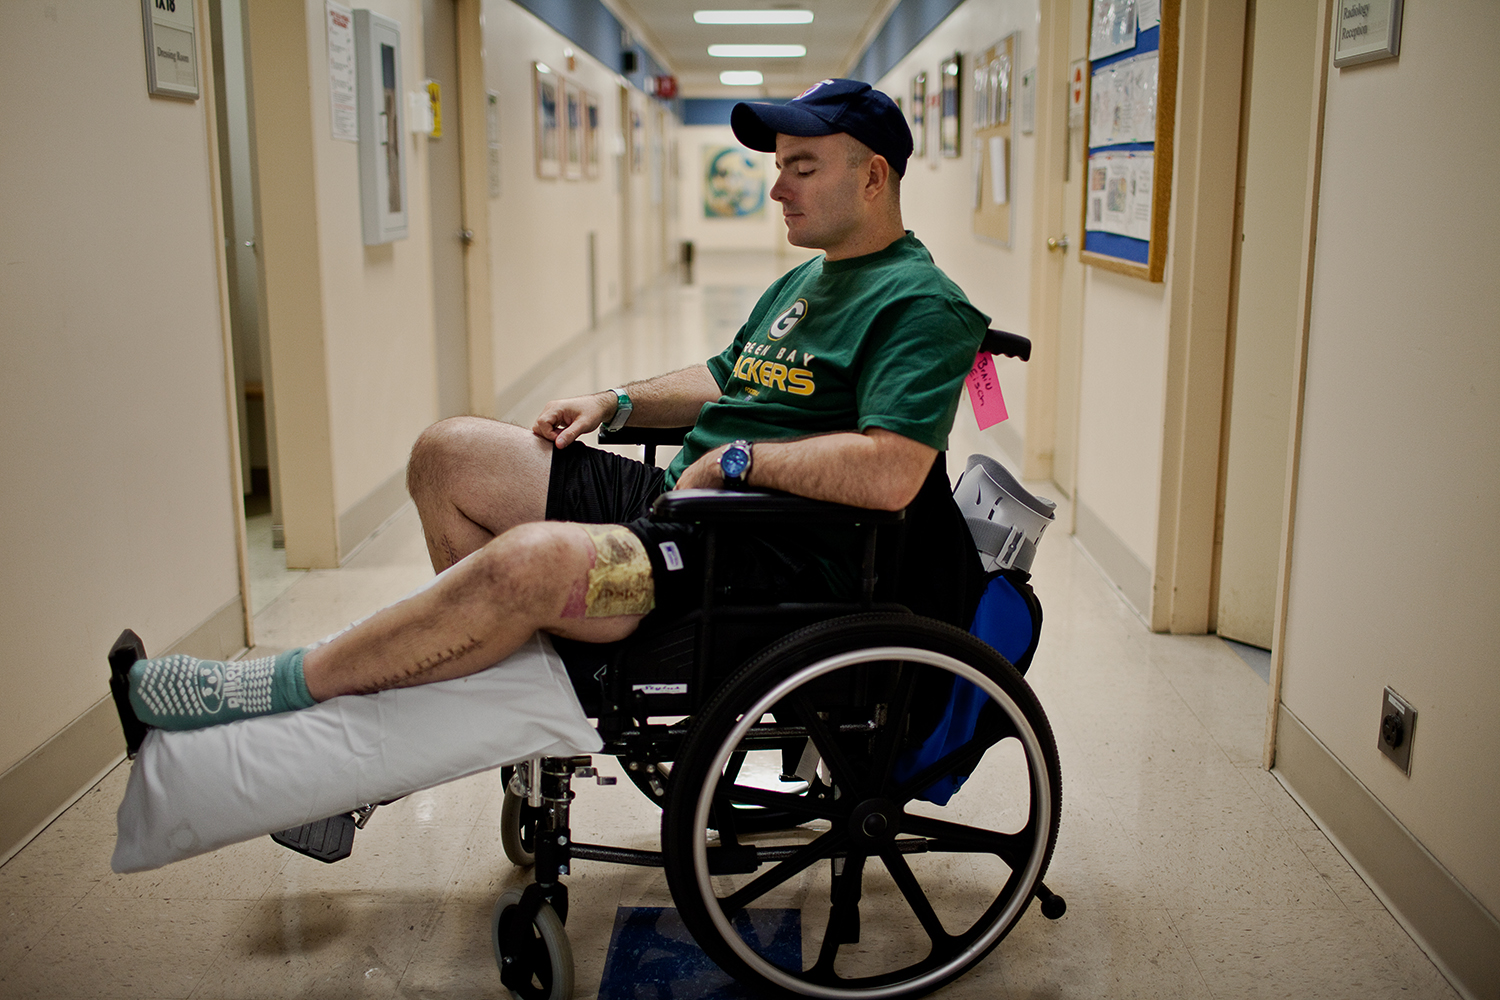  Sergeant First Class Eisch sits in recovery at Walter Reed Army Medical Center. The boys have since visited him and are waiting for his return in Wautoma, WI. “Brian came home,” Shawn Eisch said one evening after visiting his brother in the hospital